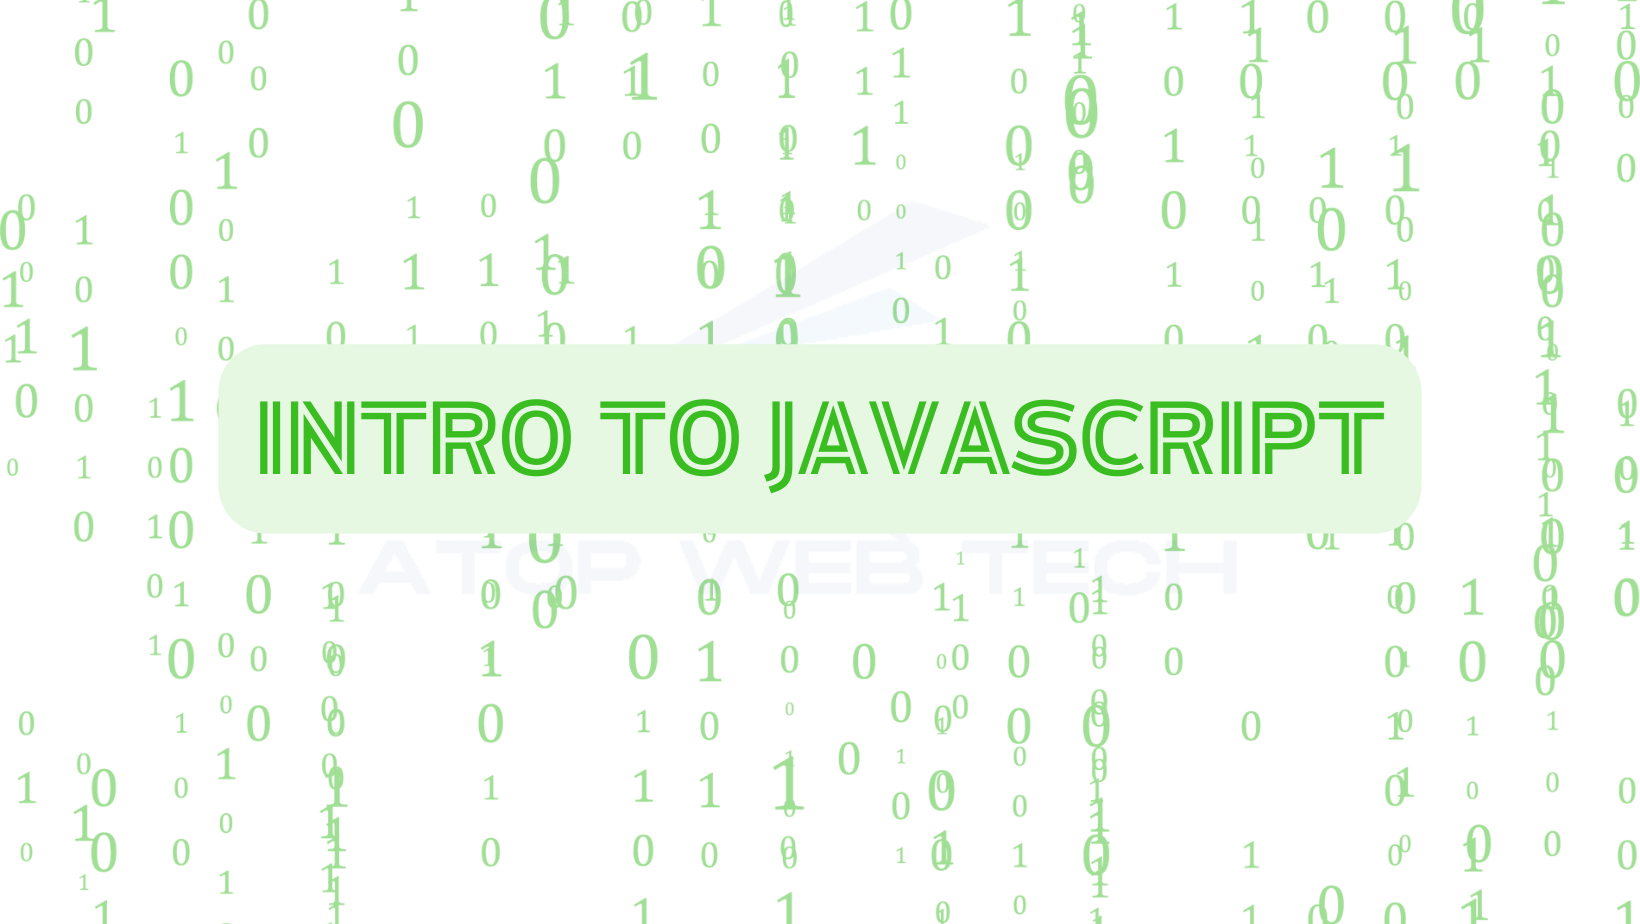 Introduction to Javascript